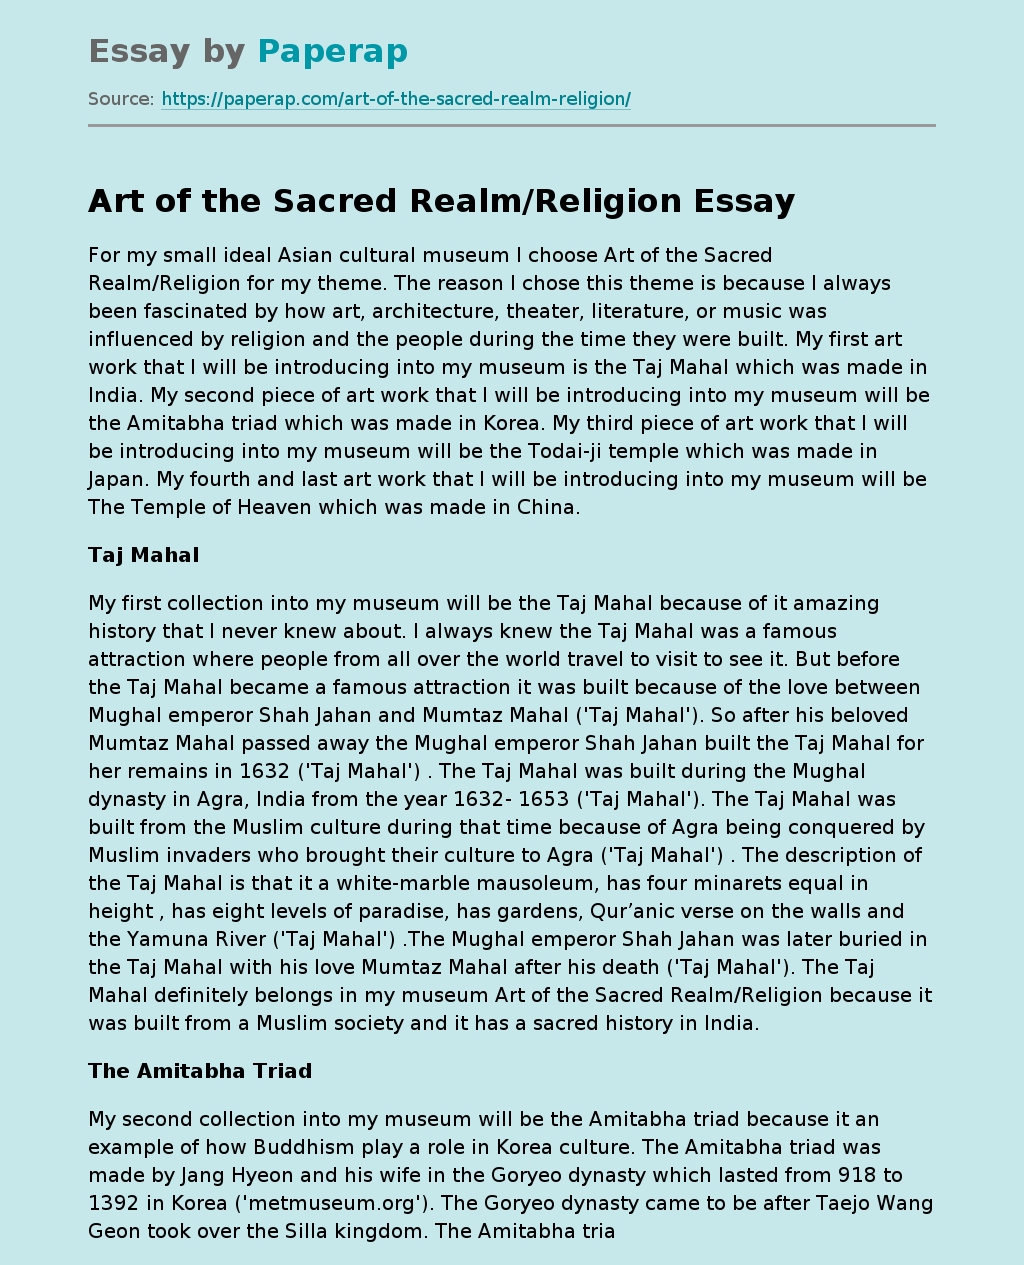 Art of the Sacred Realm/Religion